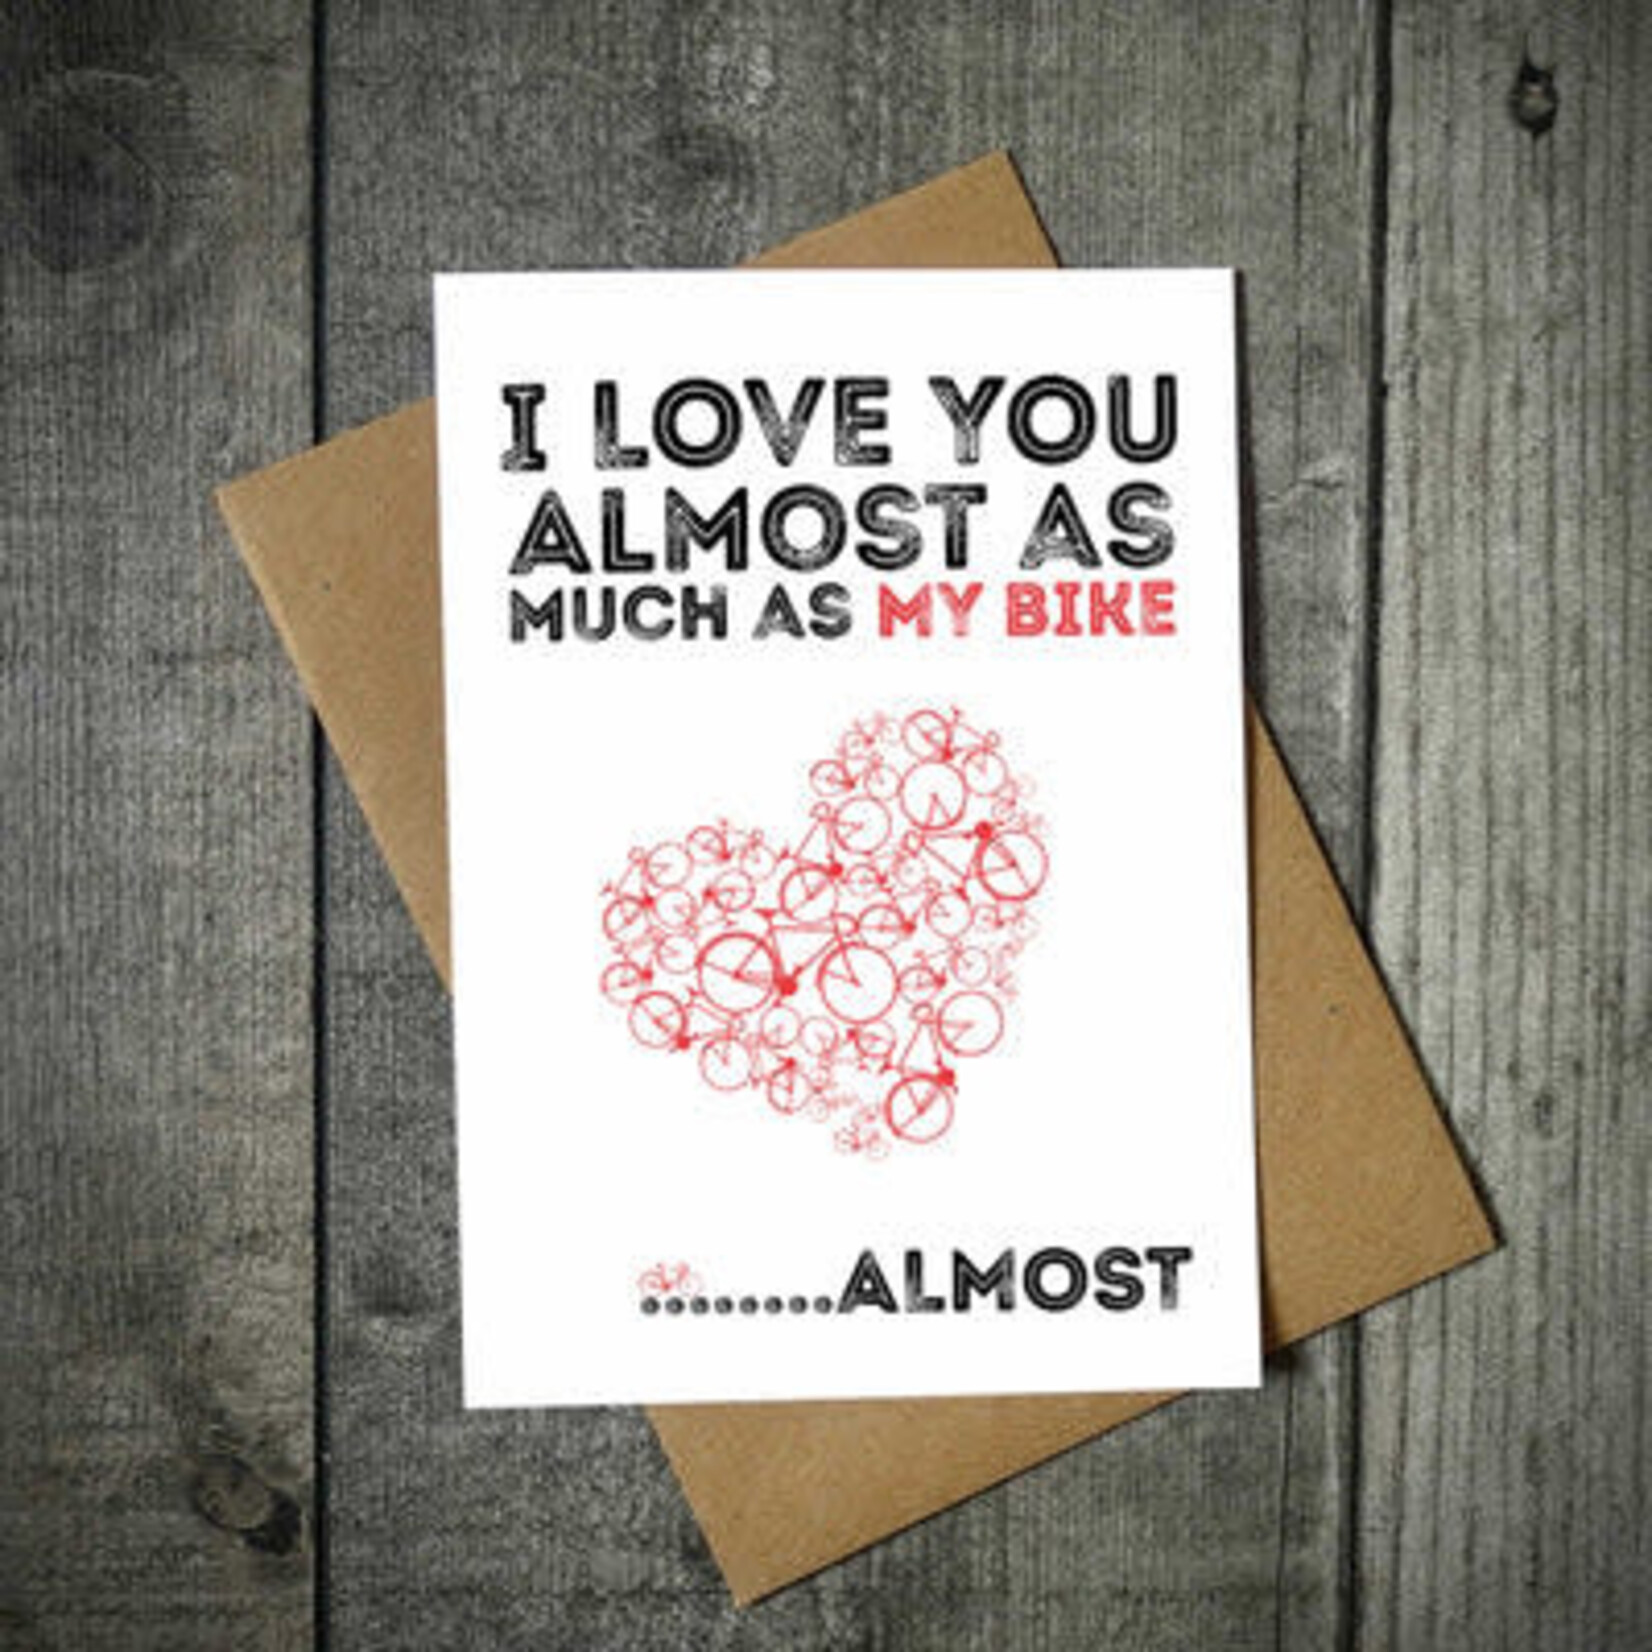 EllieBeanPrints I LOVE YOU ALMOST AS MUCH AS MY BIKE.... ALMOST!! VALENTINE'S CARD